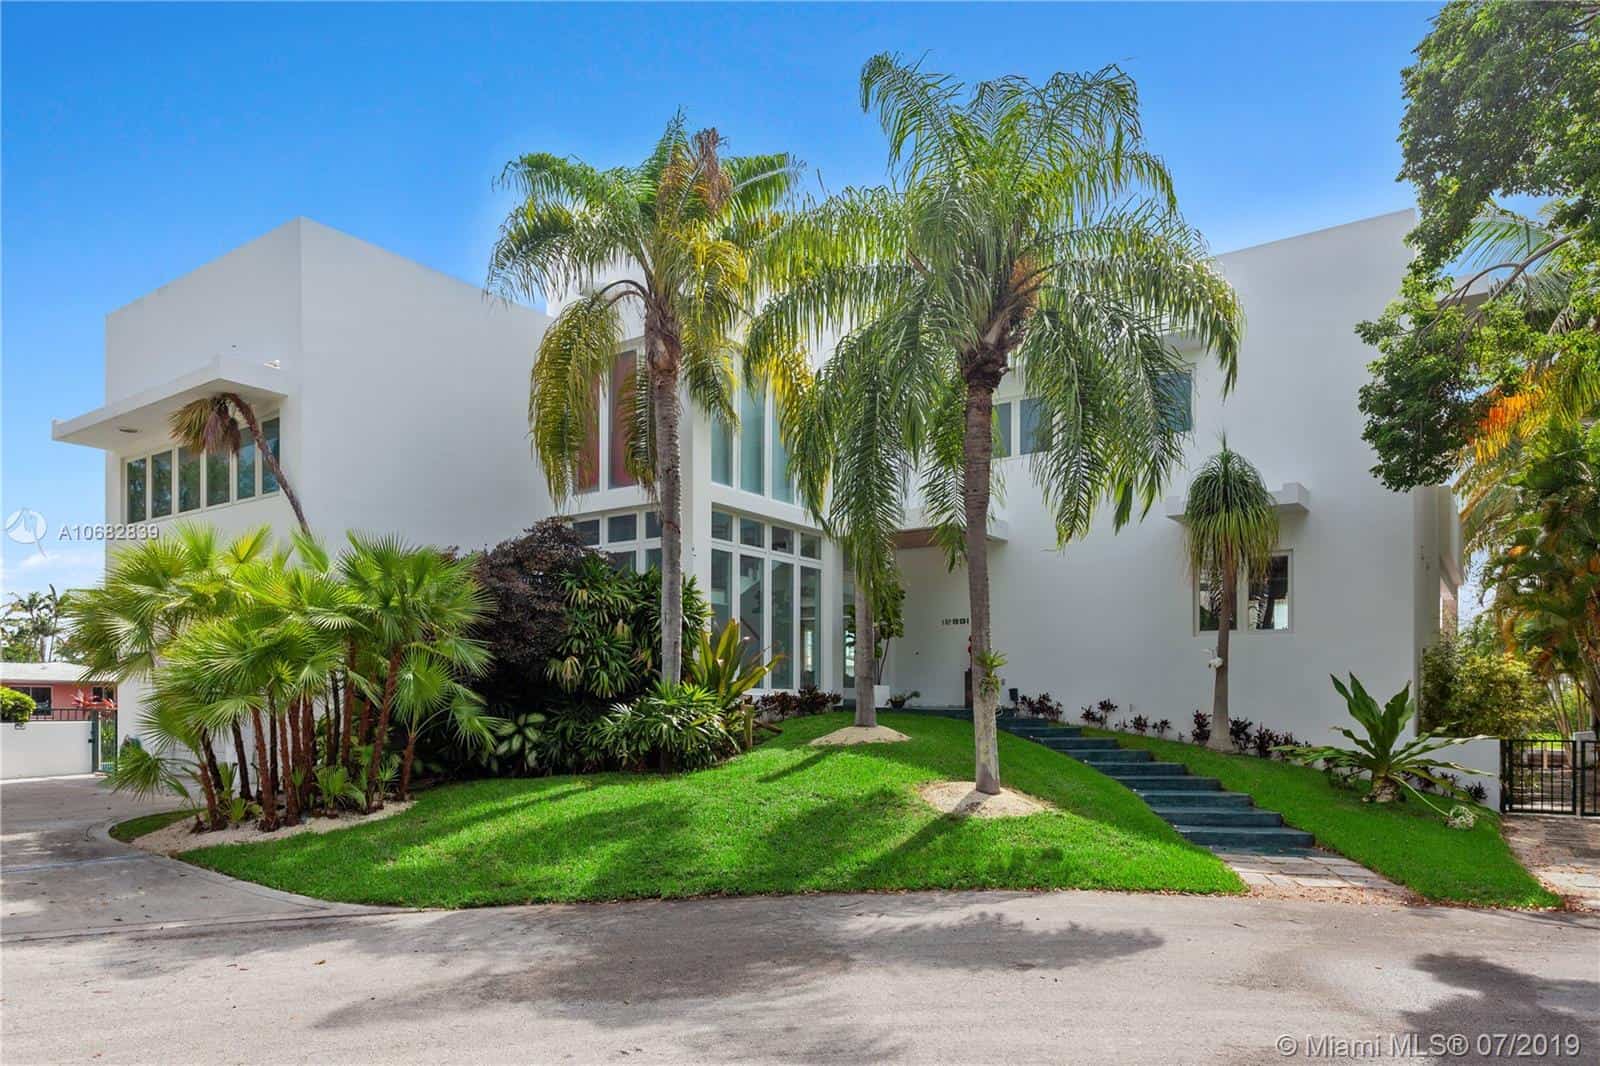 12891 Deva St Coral Gables, FL 33156: Ultra-Luxury Homes for Sale in Coral Gables